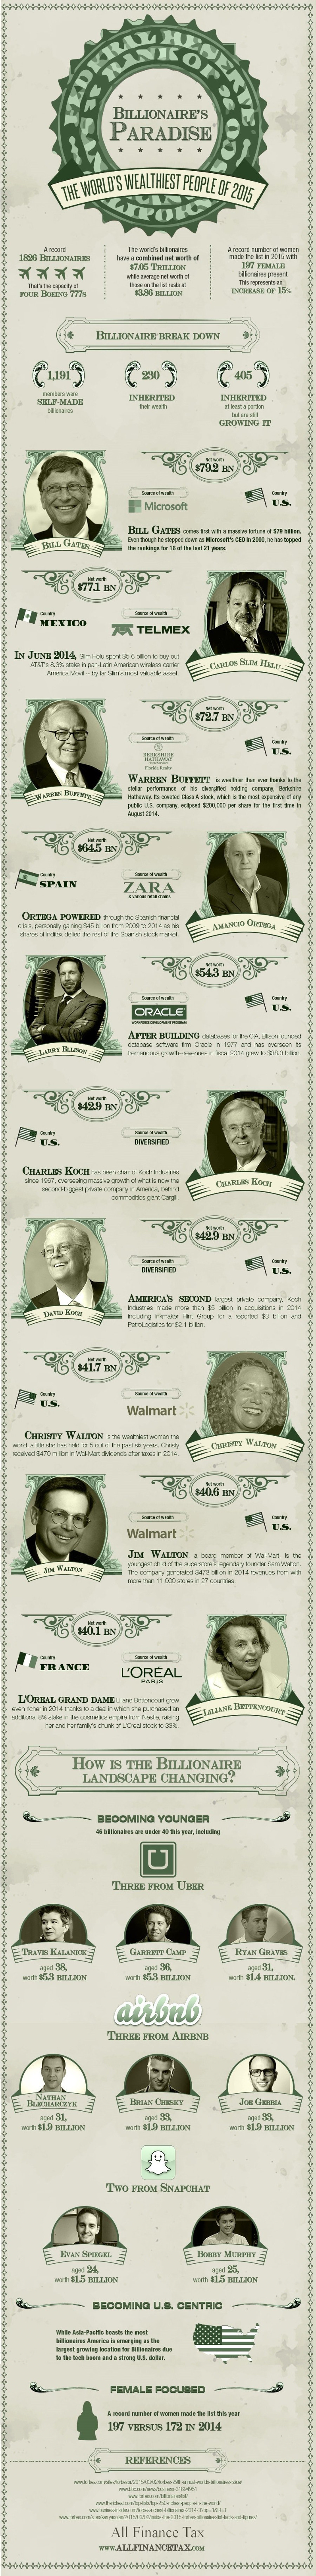 Billionaire's Paradise: The World's Wealthiest People in 2015